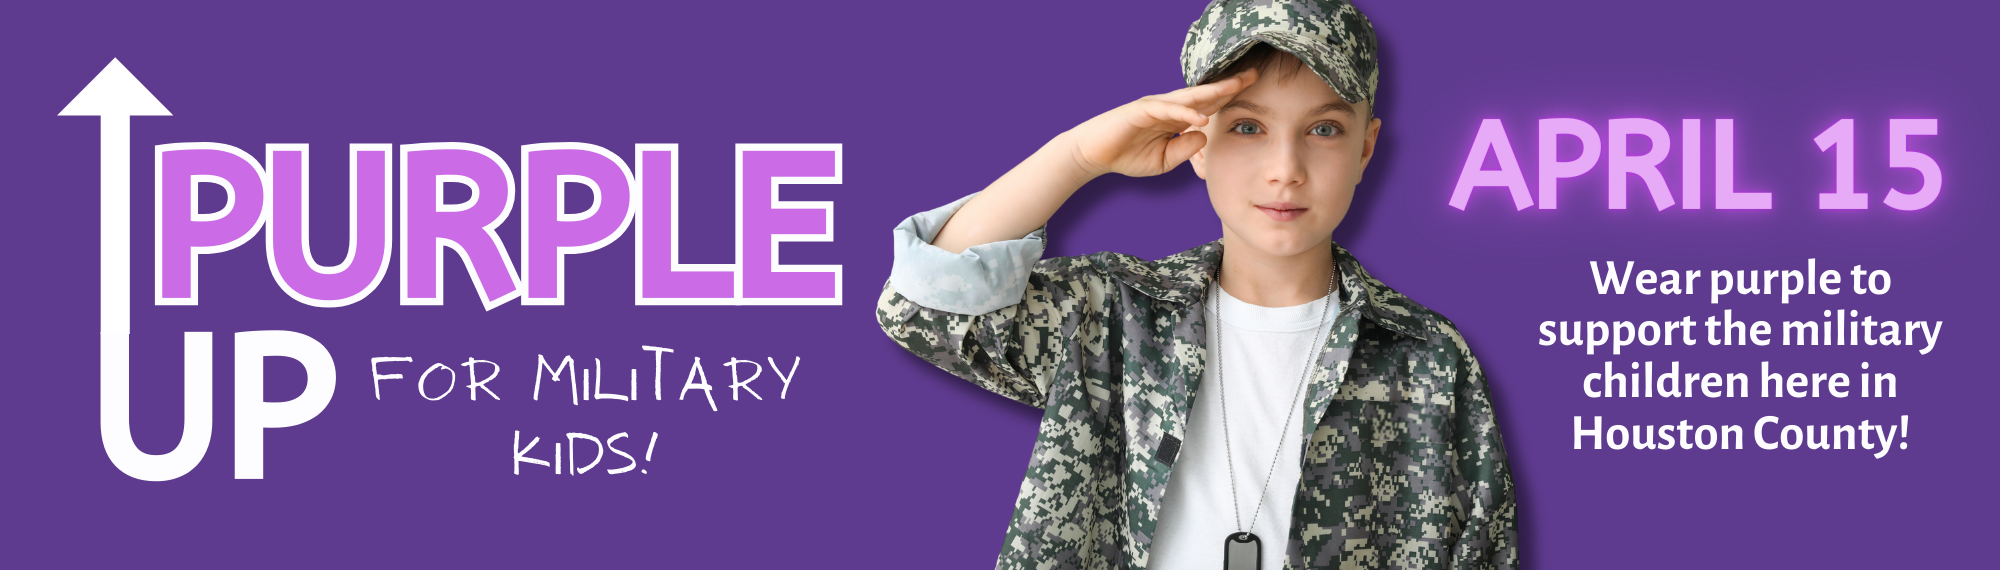 Purple Up for Military Kids!  April 15 - Wear purple to support the military children here in Houston County!